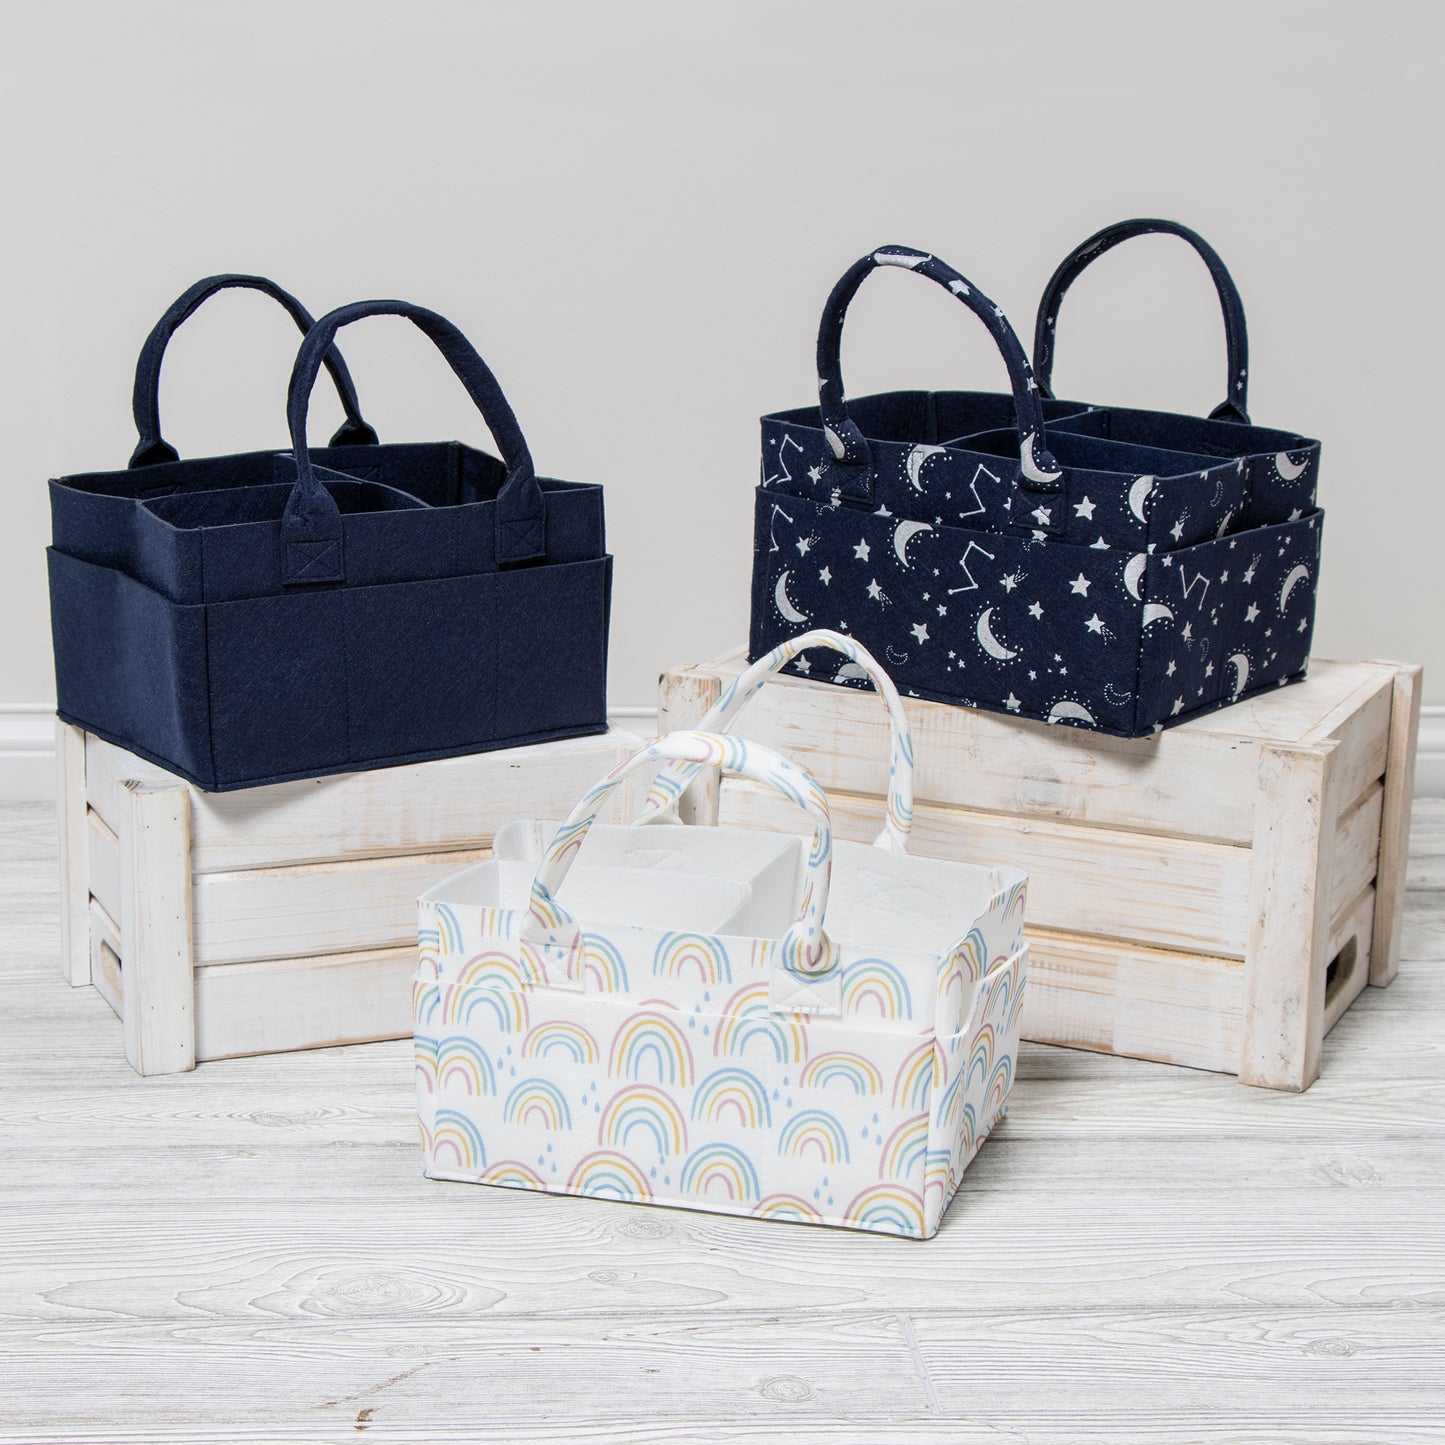 Felt Caddy Stylized image in a variety of prints including constellation, rainbow and solid navy